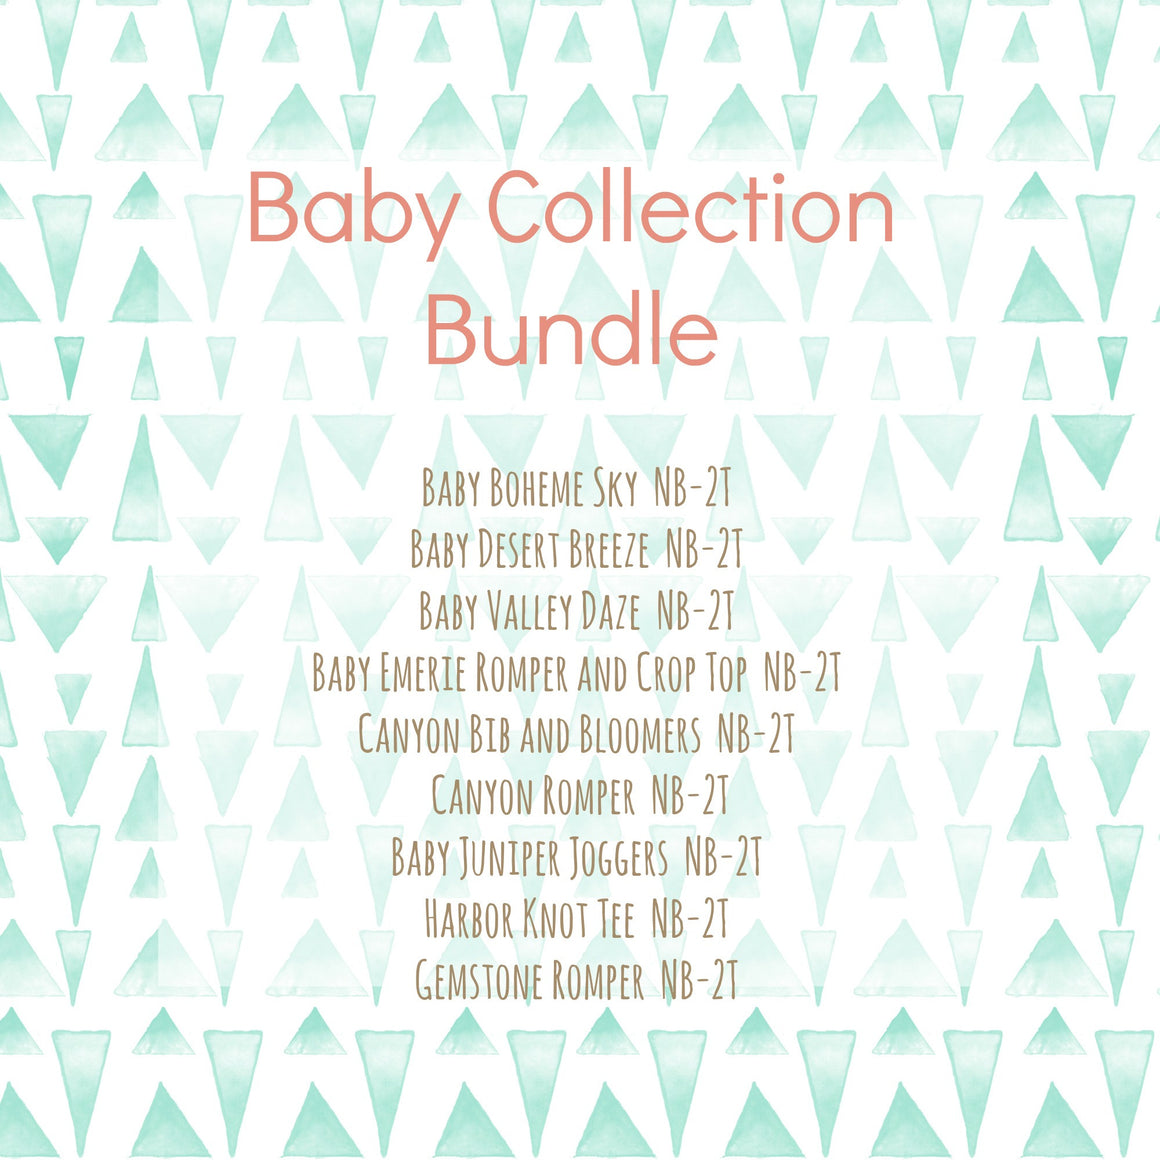 Baby Collection Bundle